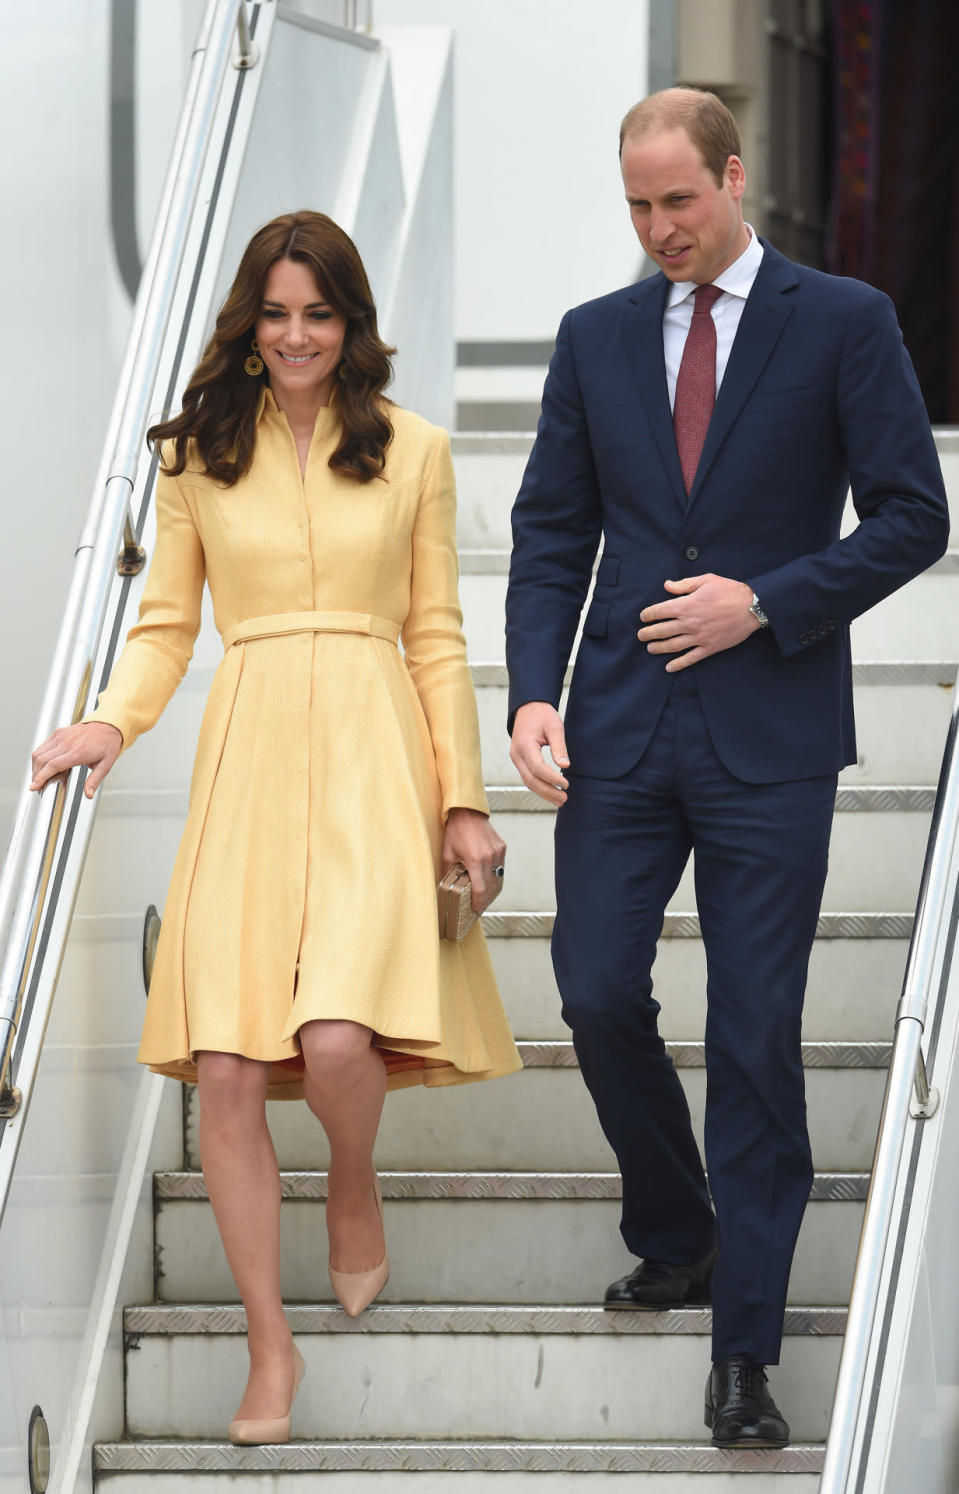 <p>Arriving in Bhutan, Kate looked lovely in a lemon yellow coat dress paired with nude heels and a gold box clutch. It’s not the first time the Duchess has worn the Emilia Wickstead number: She also donned it back in 2012. <i>[Photo: PA Images]</i></p>